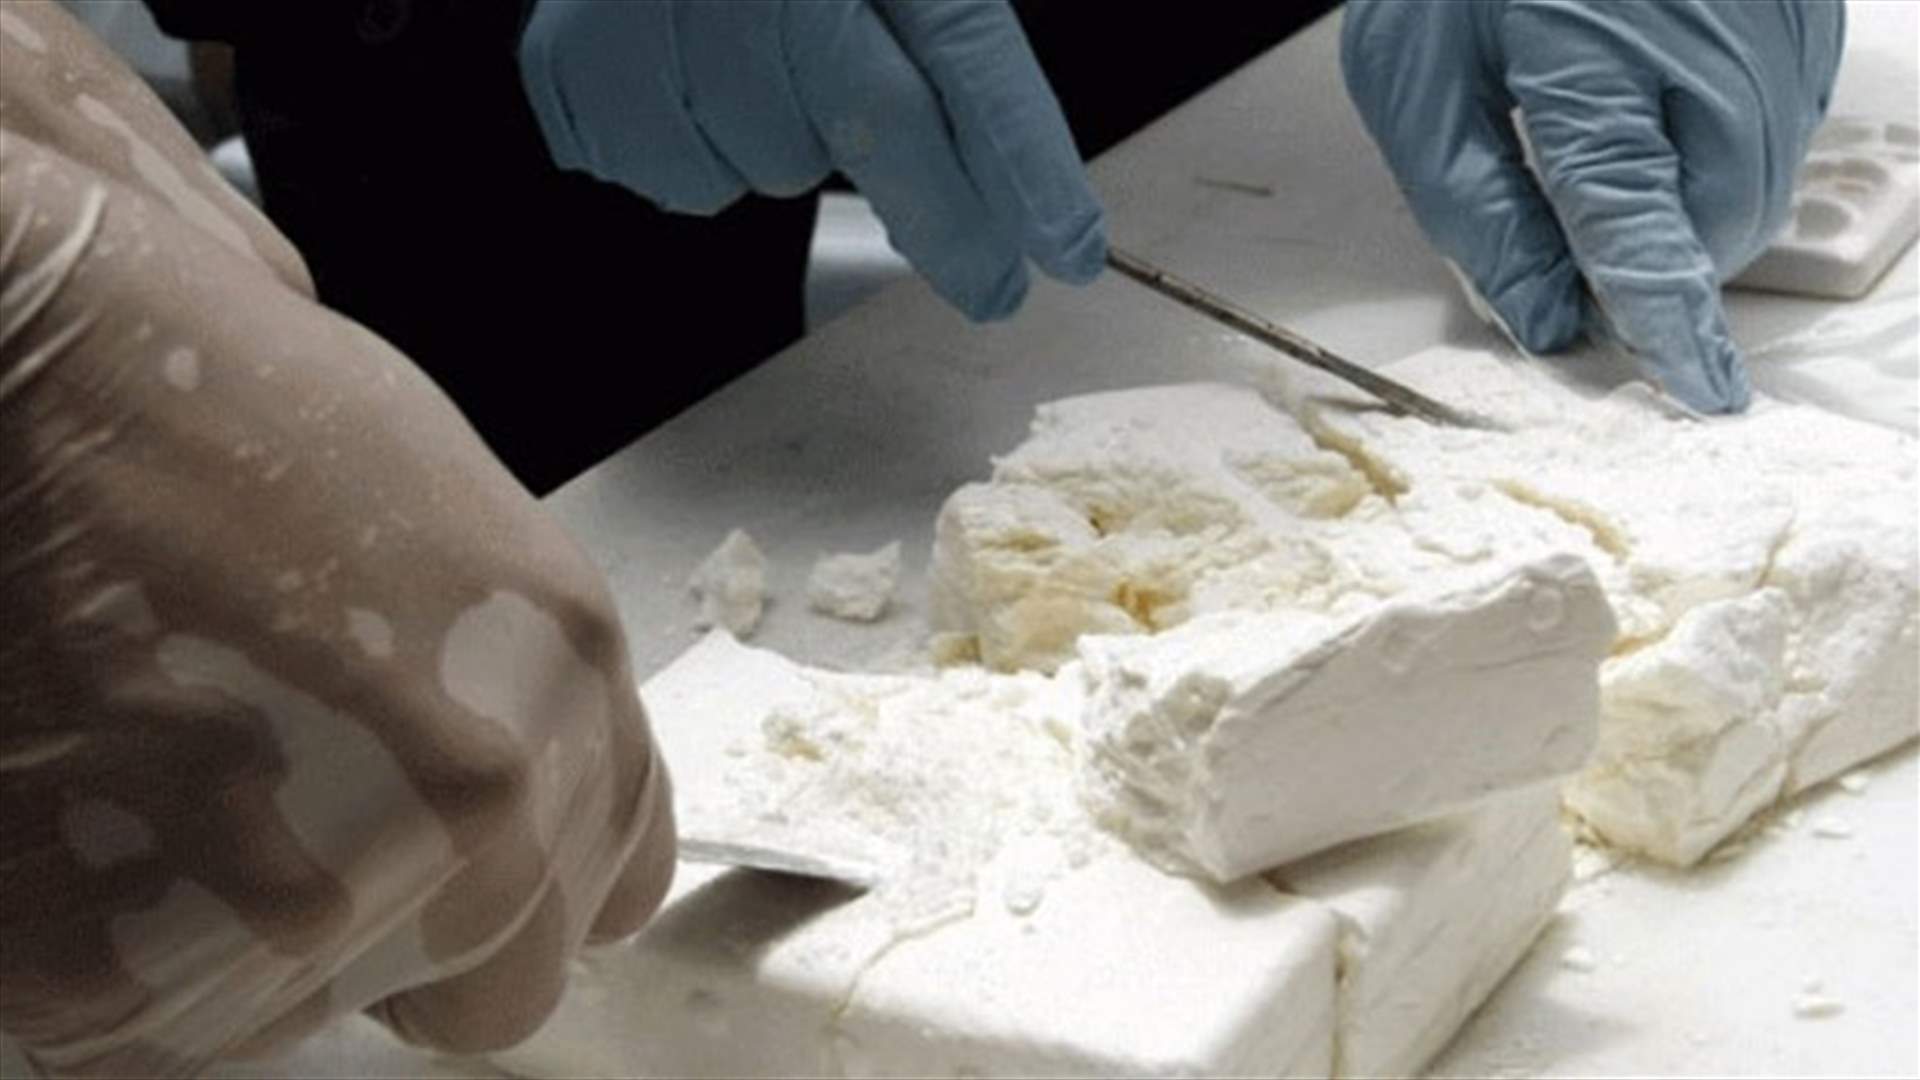 Security forces raid cocaine factory in Zahle